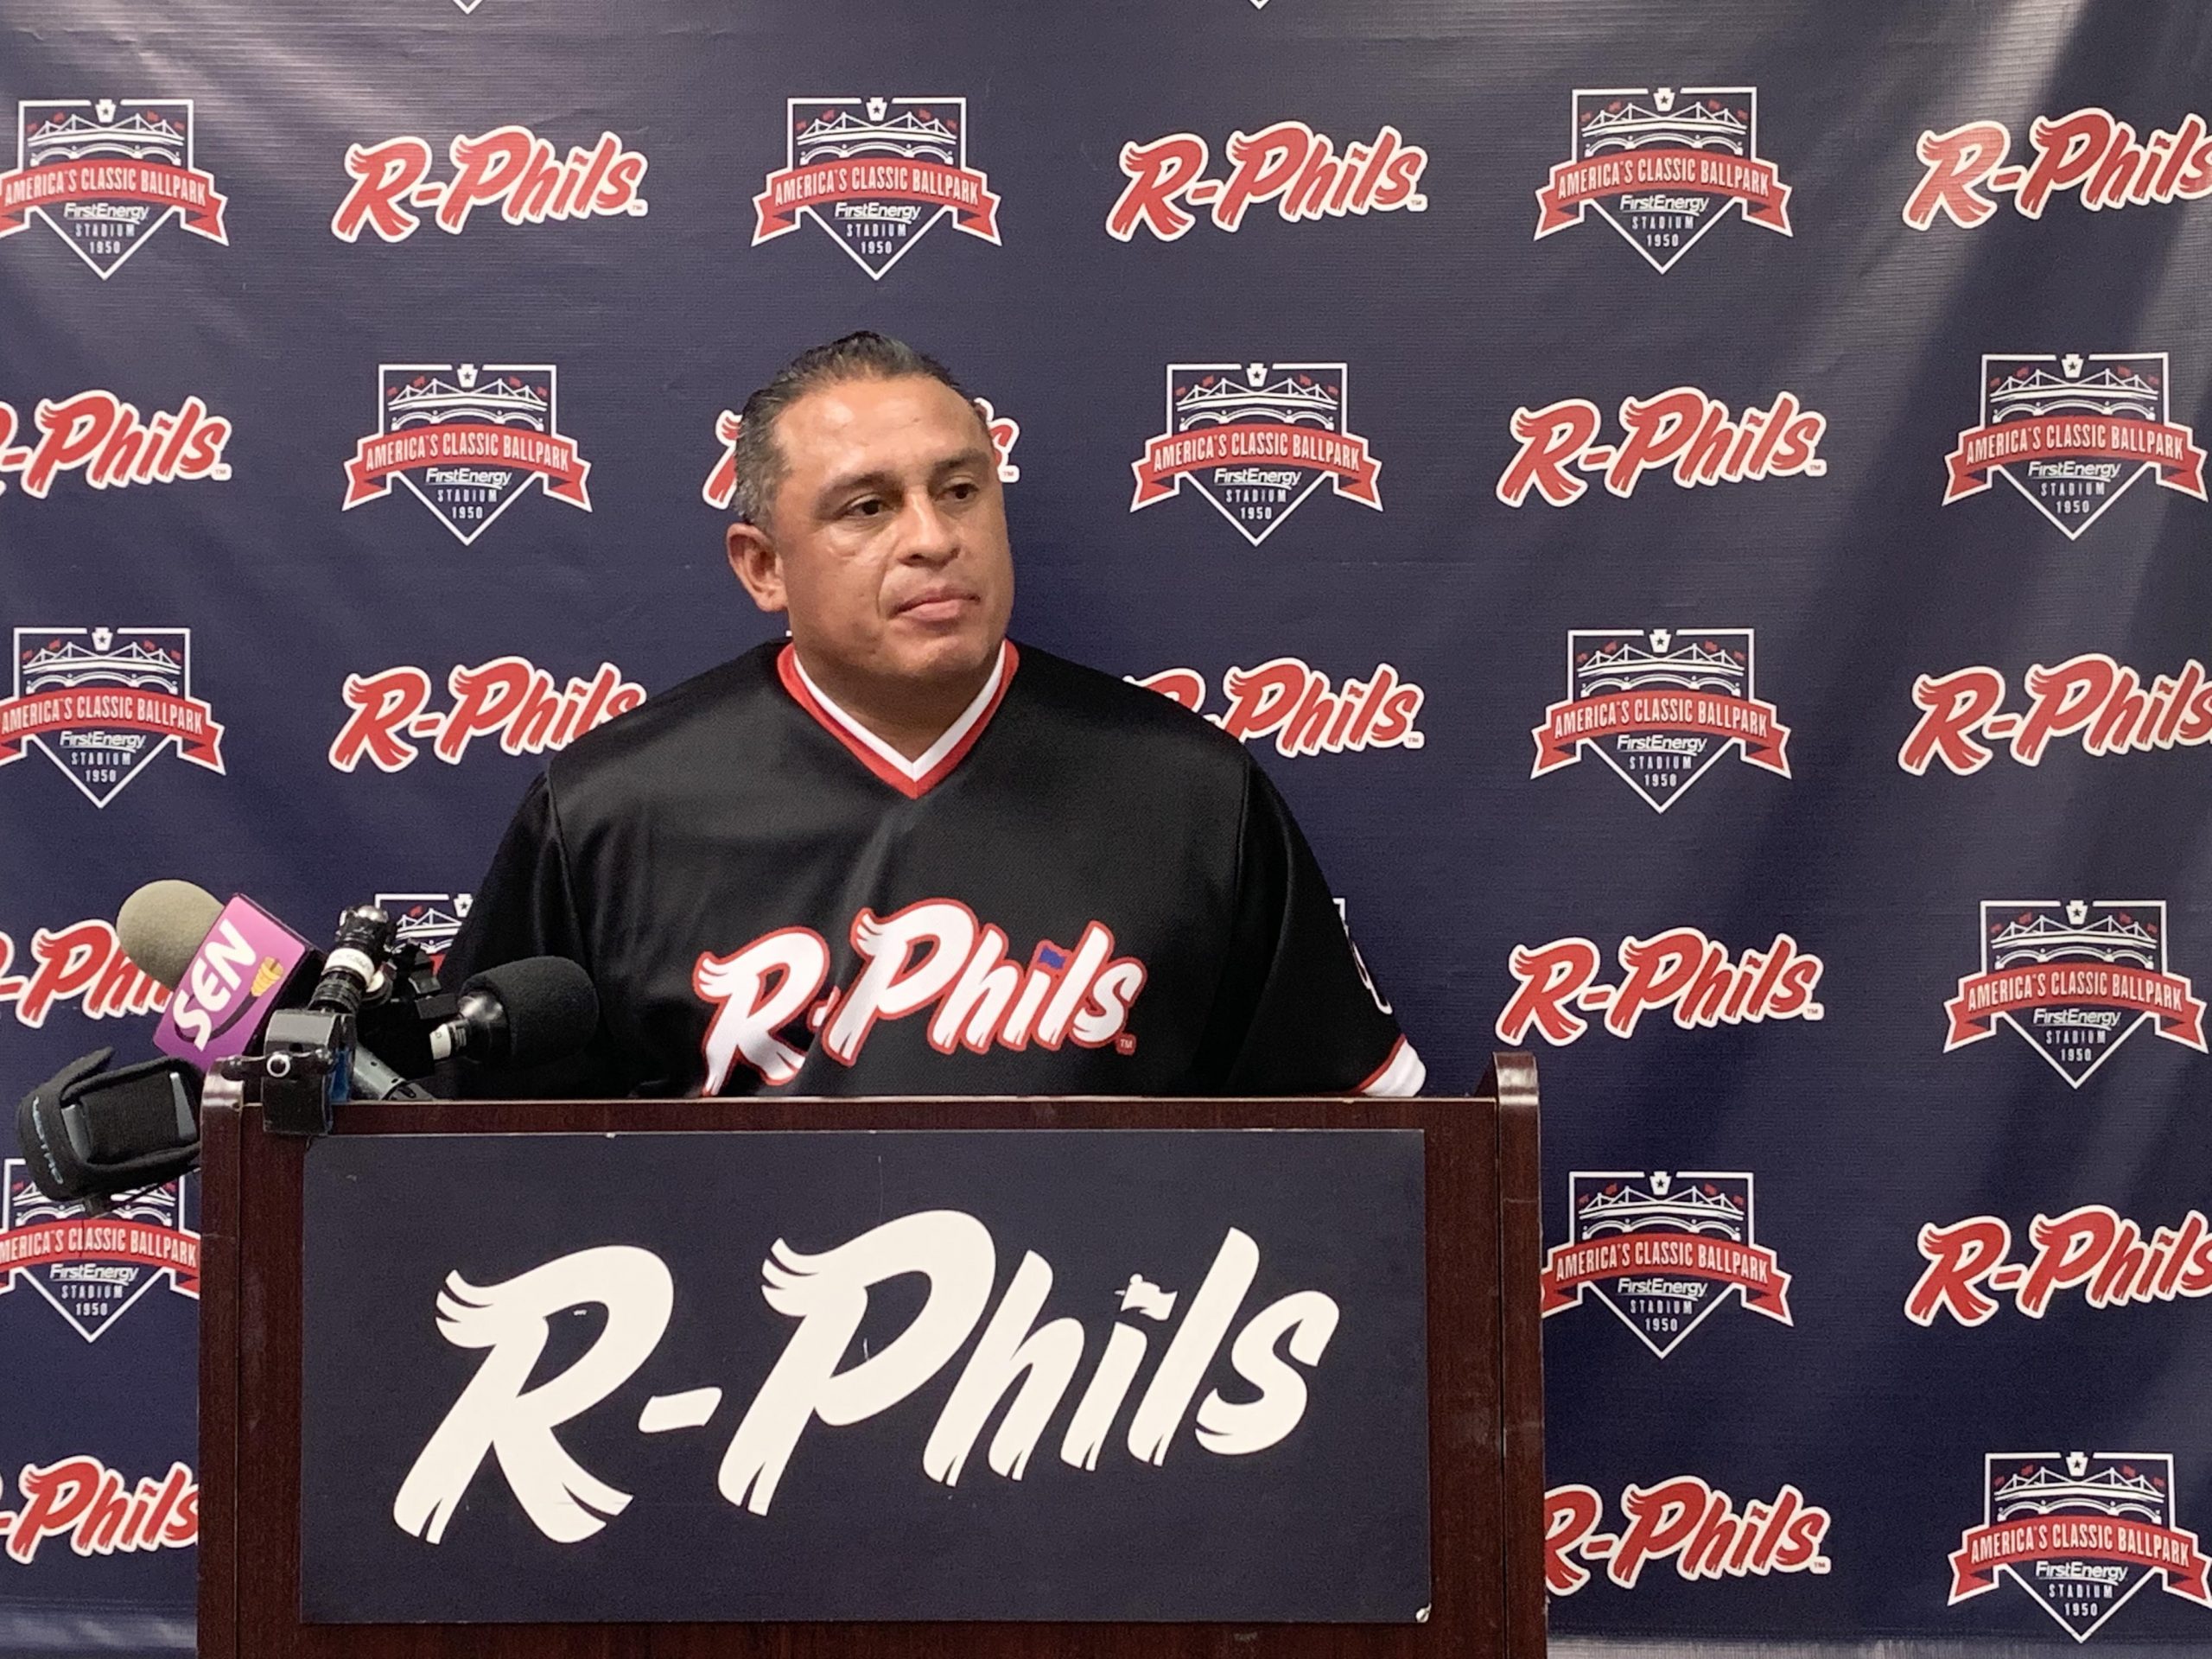 Philadelphia Phillies: Why Carlos Ruiz Is the Most Underrated